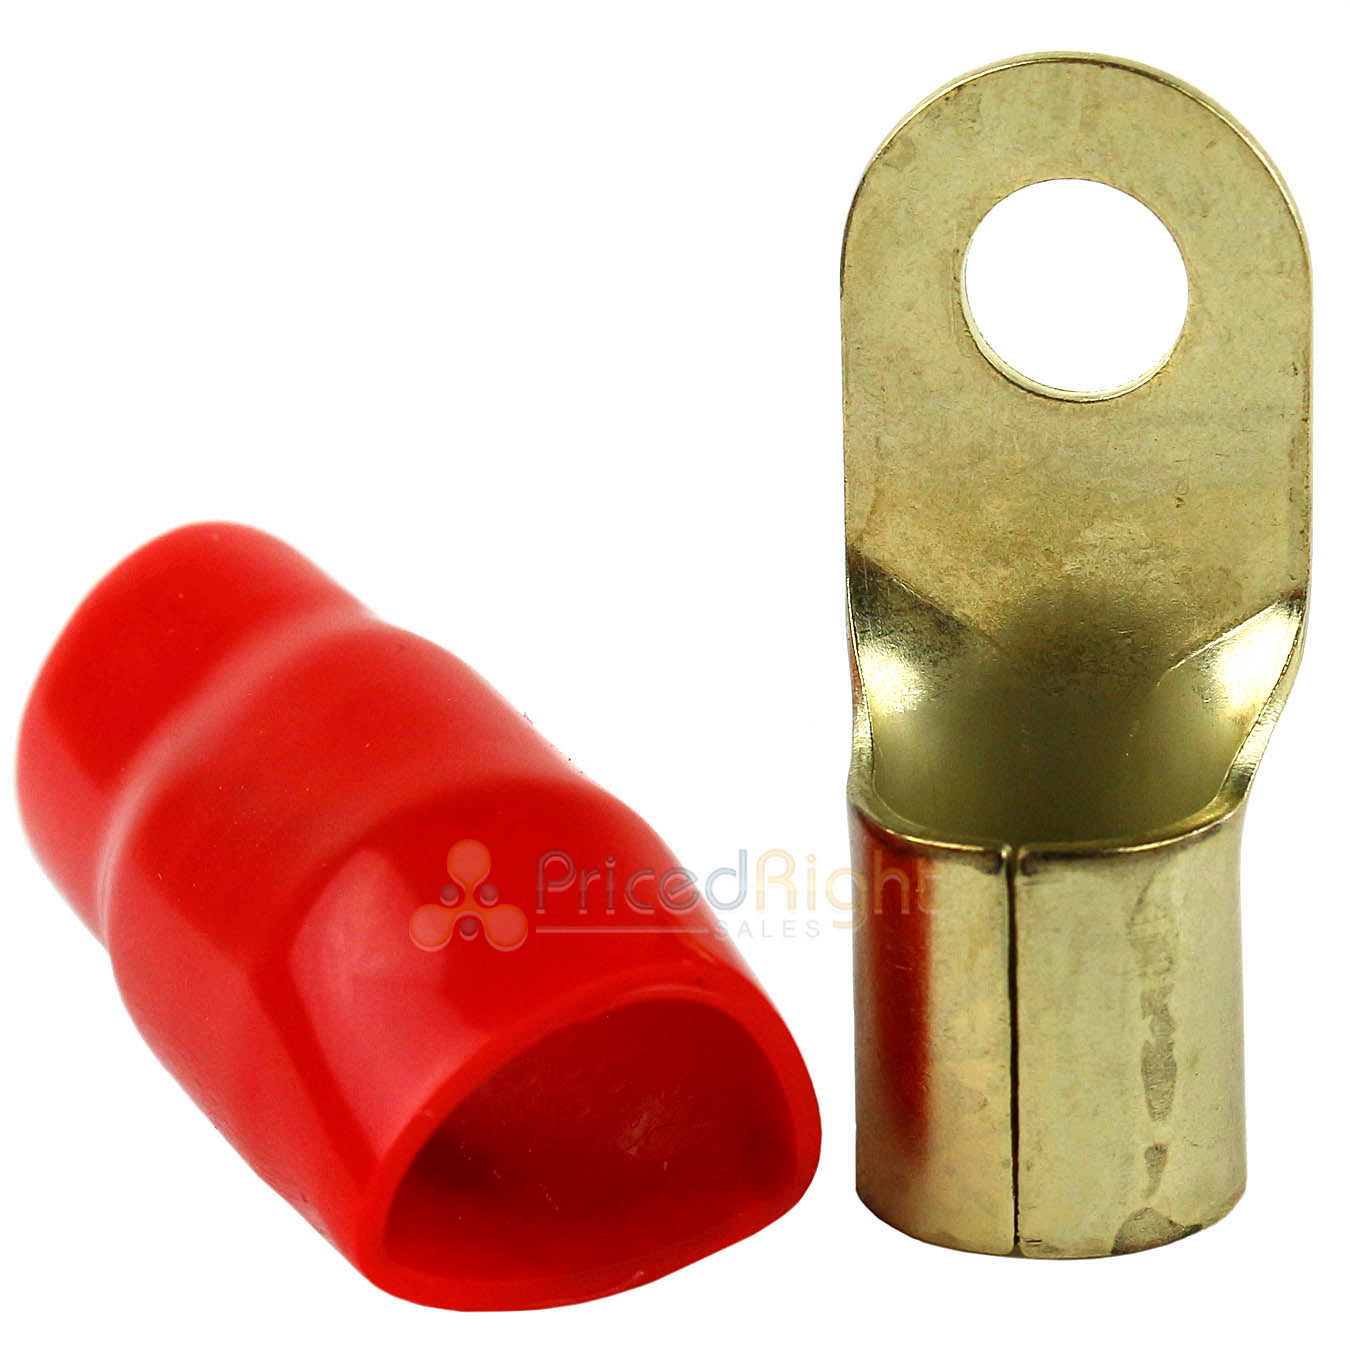 Bullz Audio Ring Terminals 1/0 Gauge 5/16" Hole Gold Plated Red Black 20 Pack